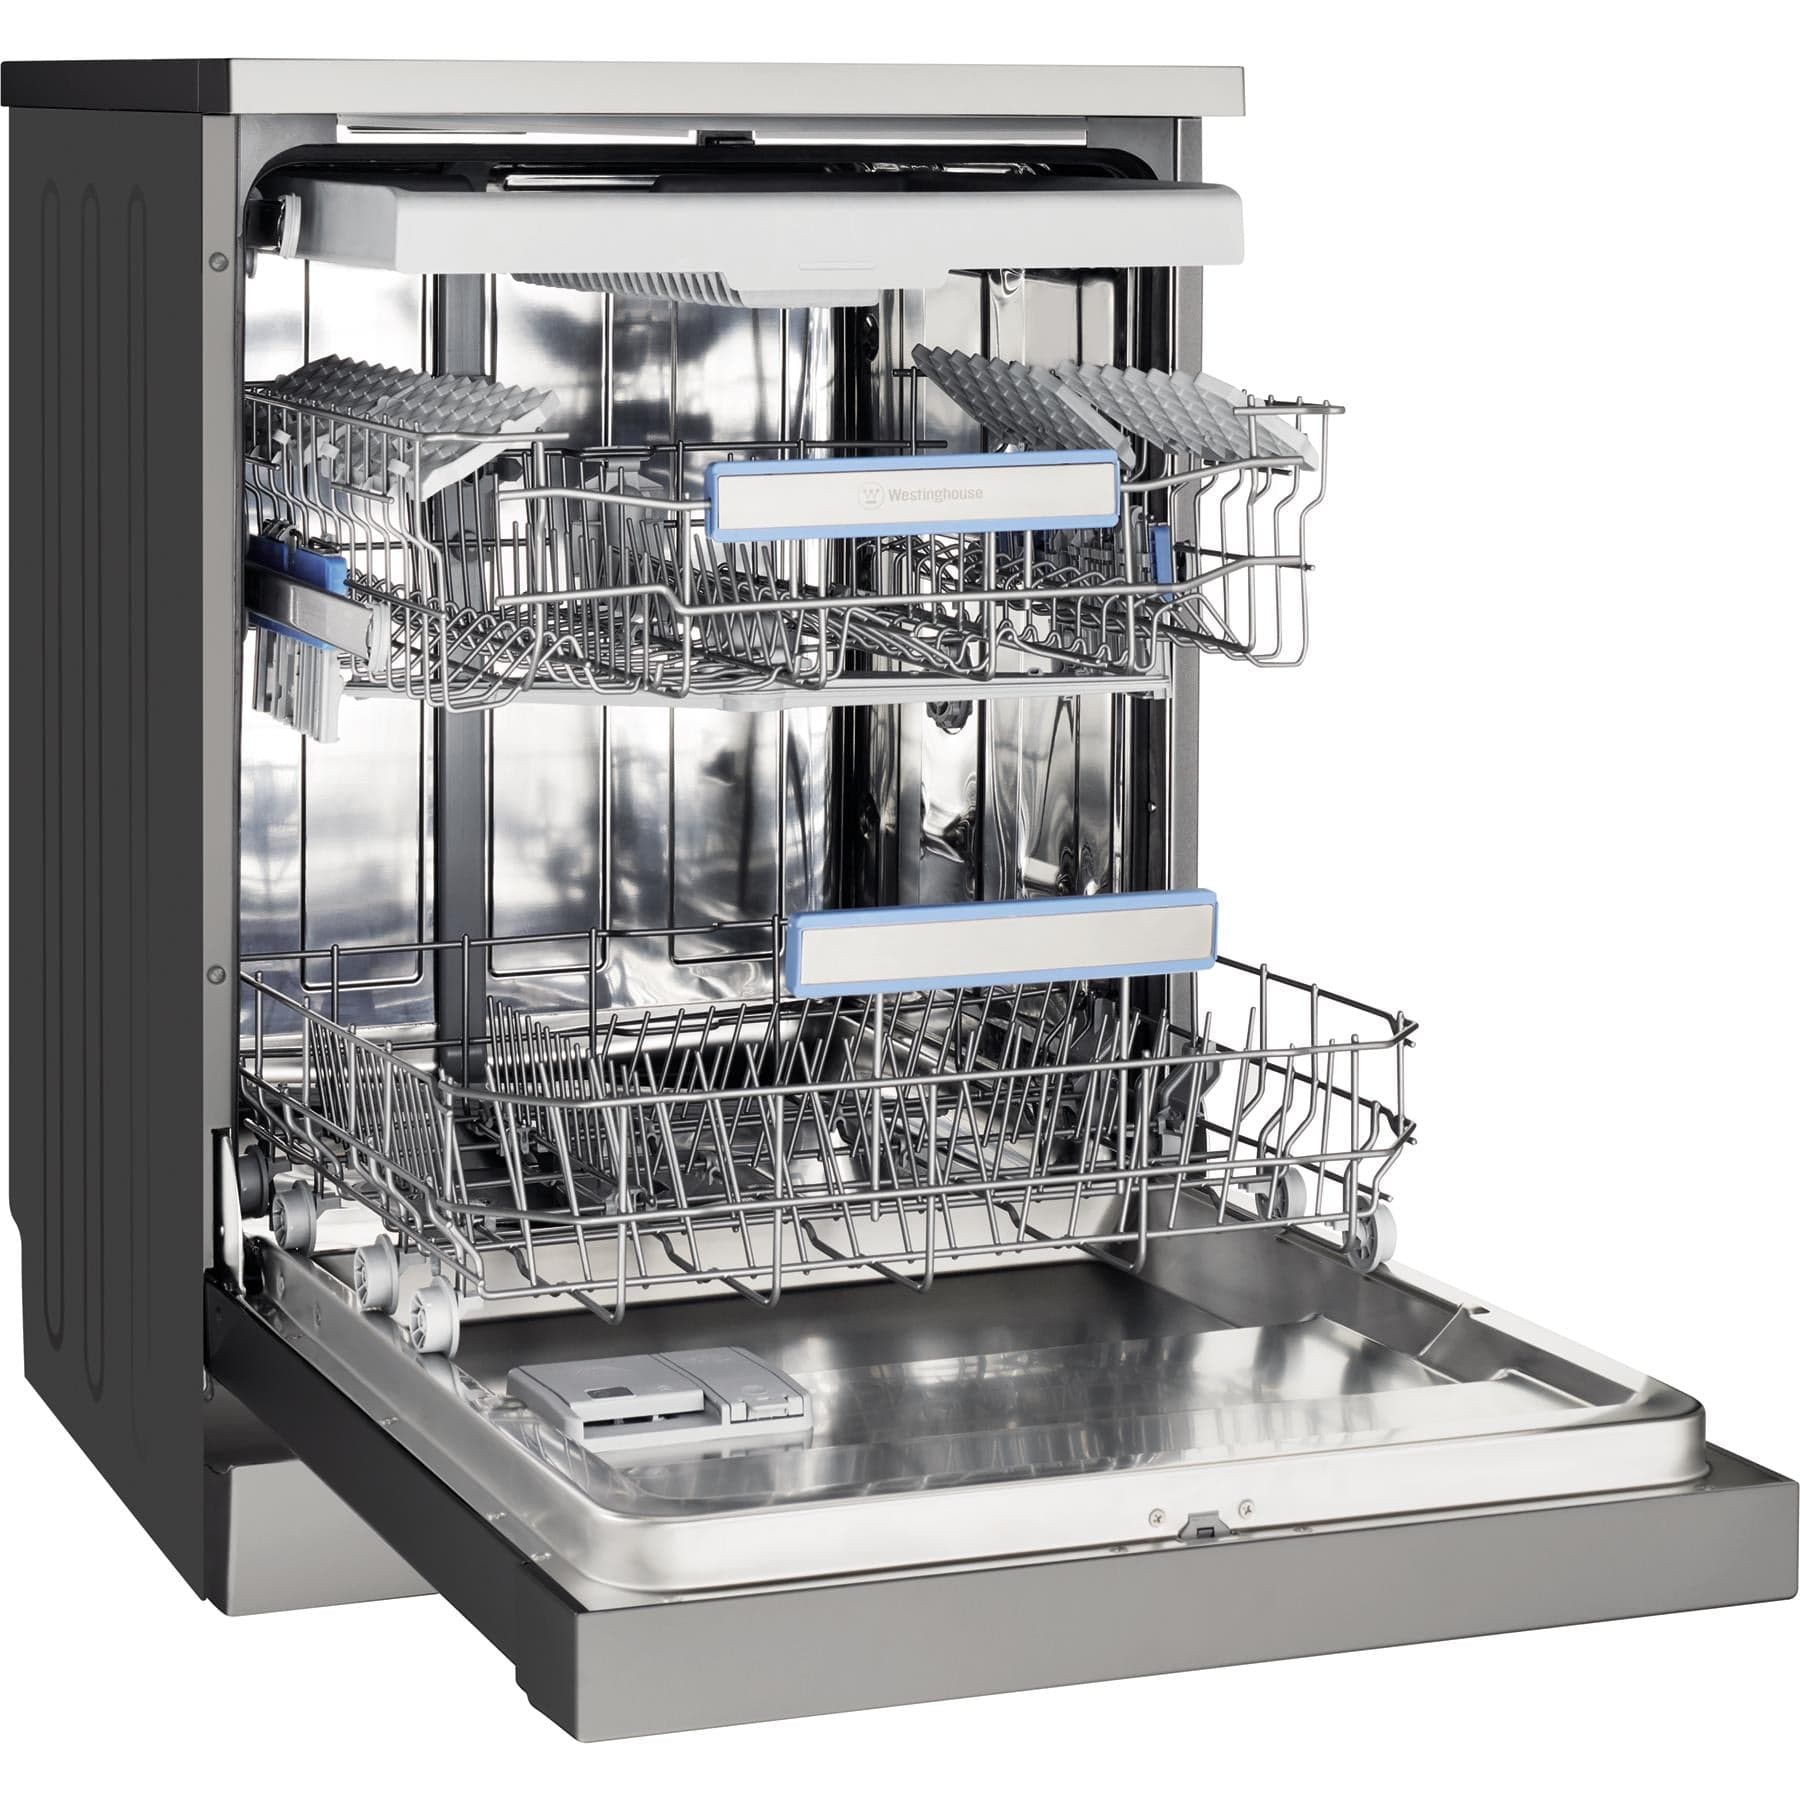 Westinghouse 15-Place Setting Freestanding Dishwasher (Dark Stainless Steel)